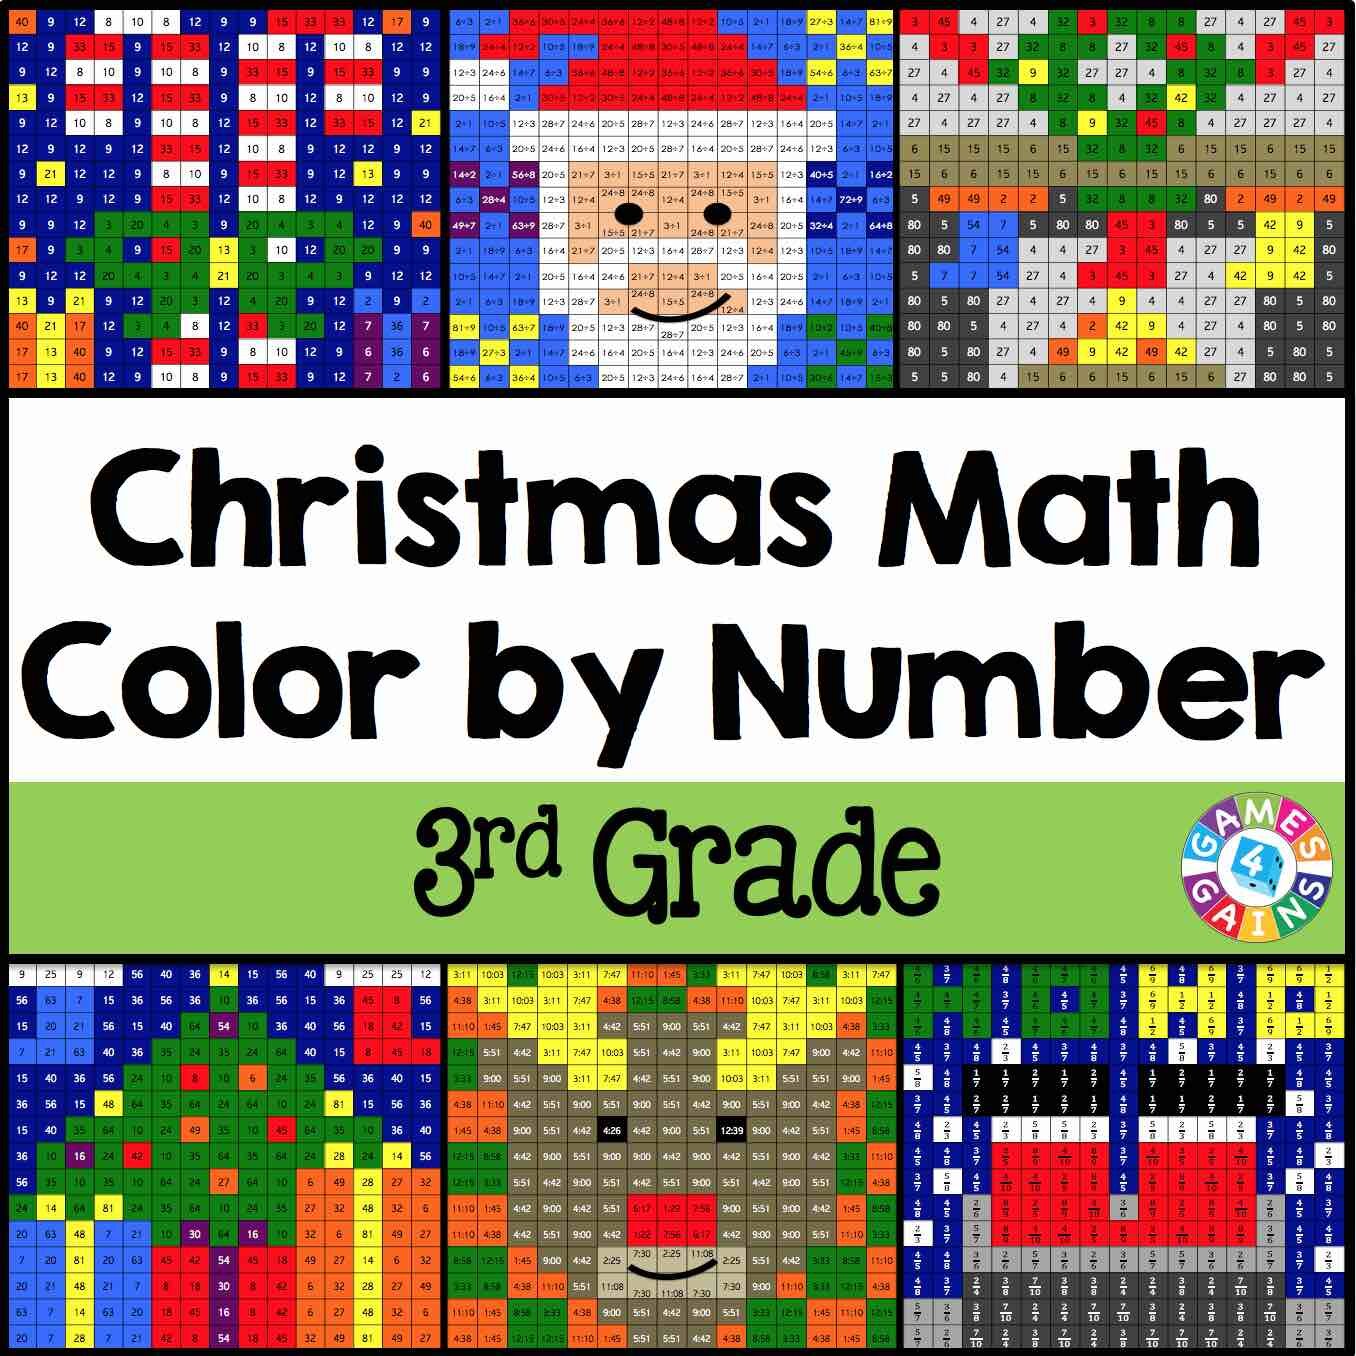 Christmas Math Color by Number 3rd Grade Cover.jpg